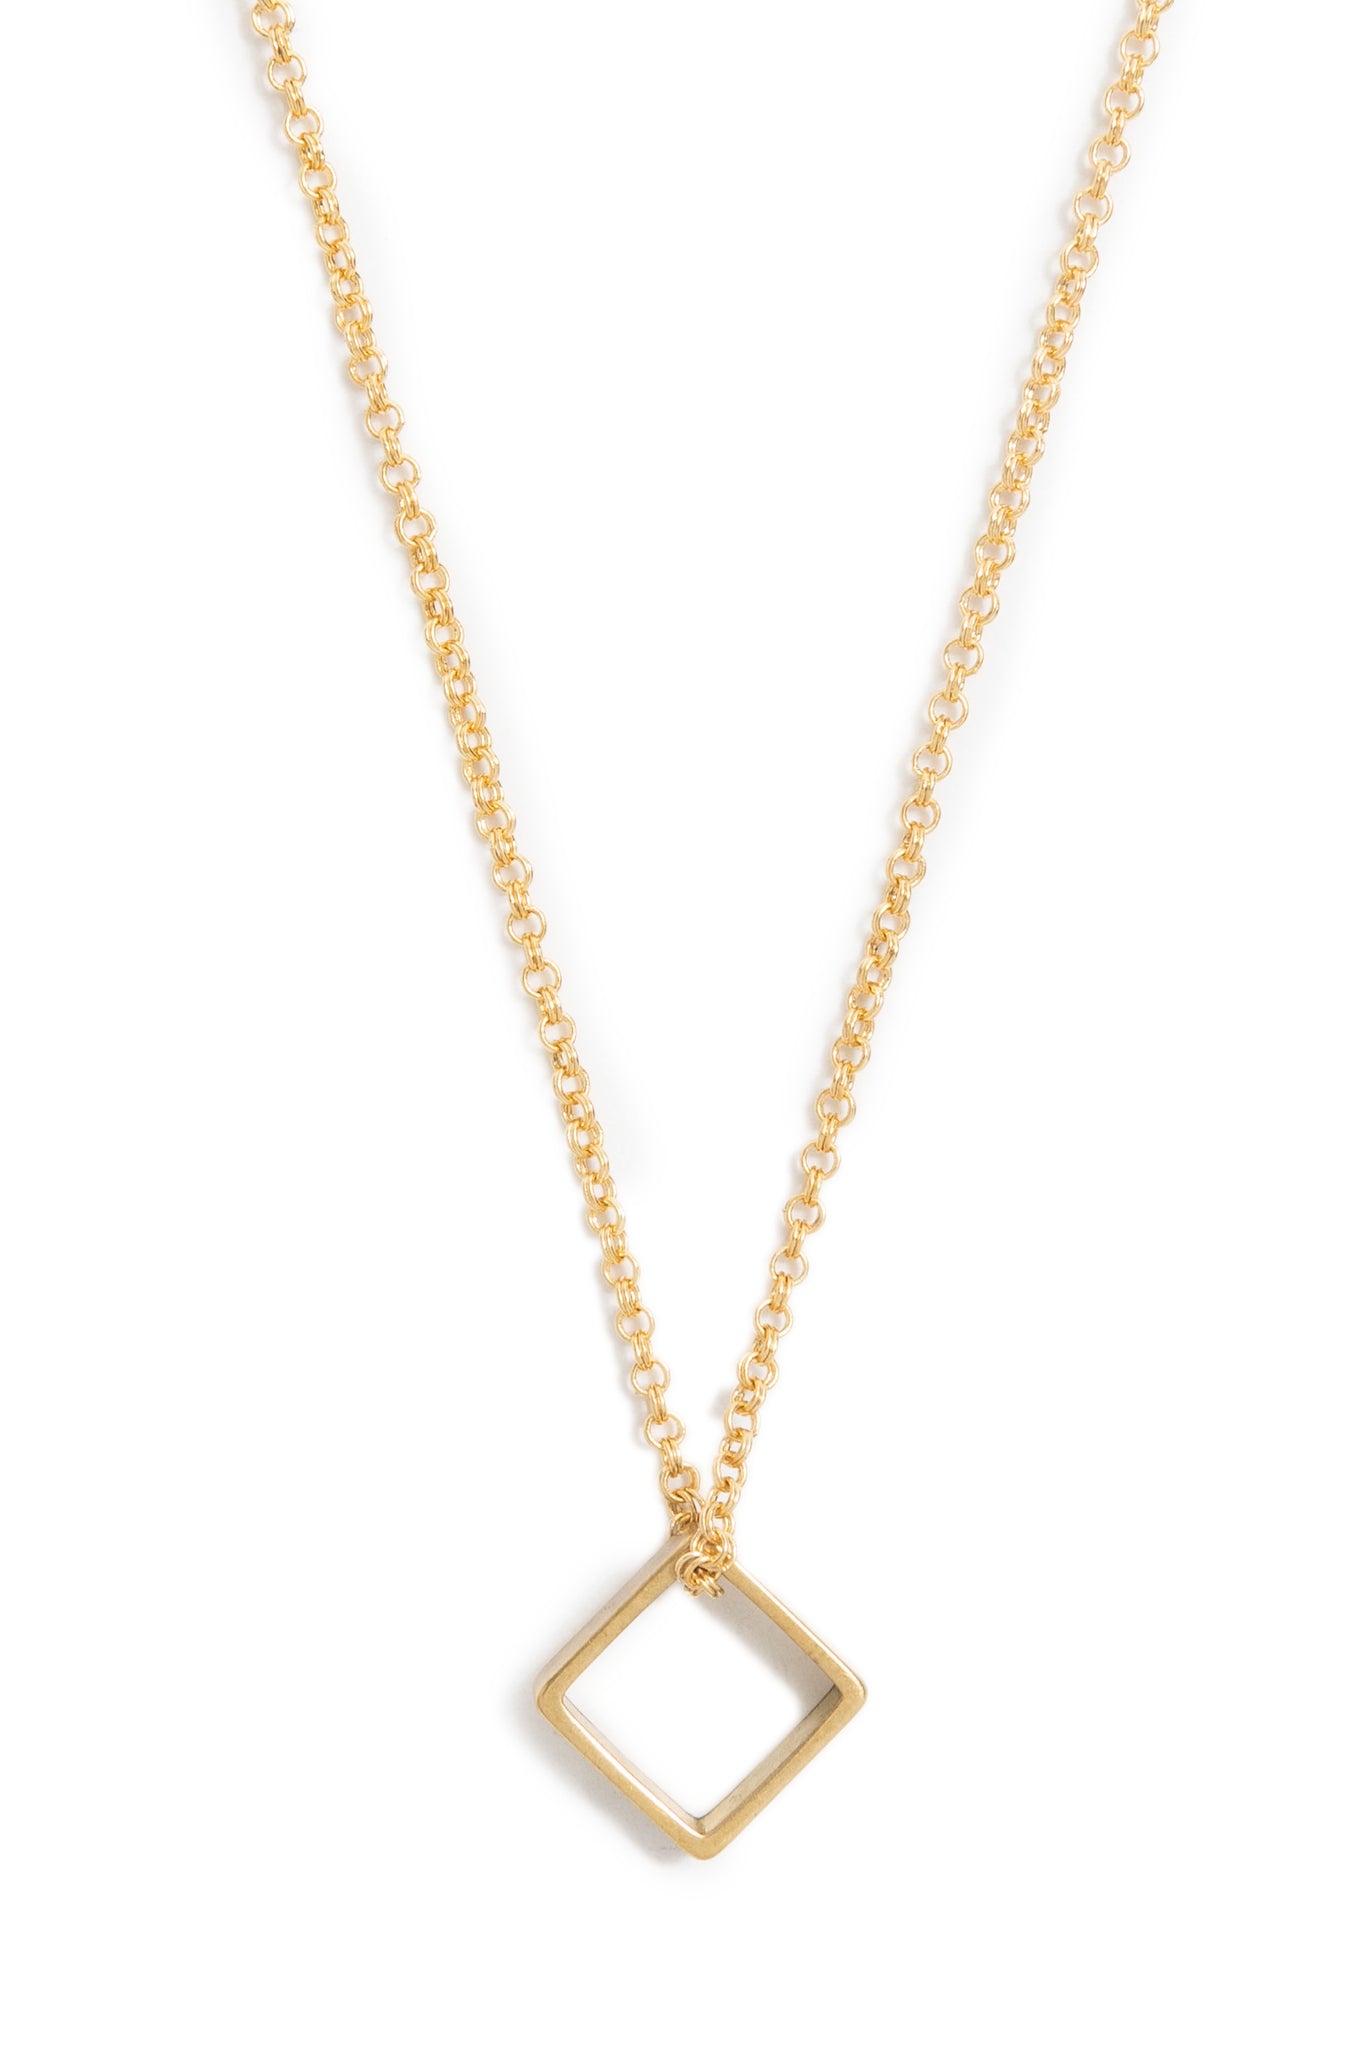 Small Brass Square Necklace on Gold Chain